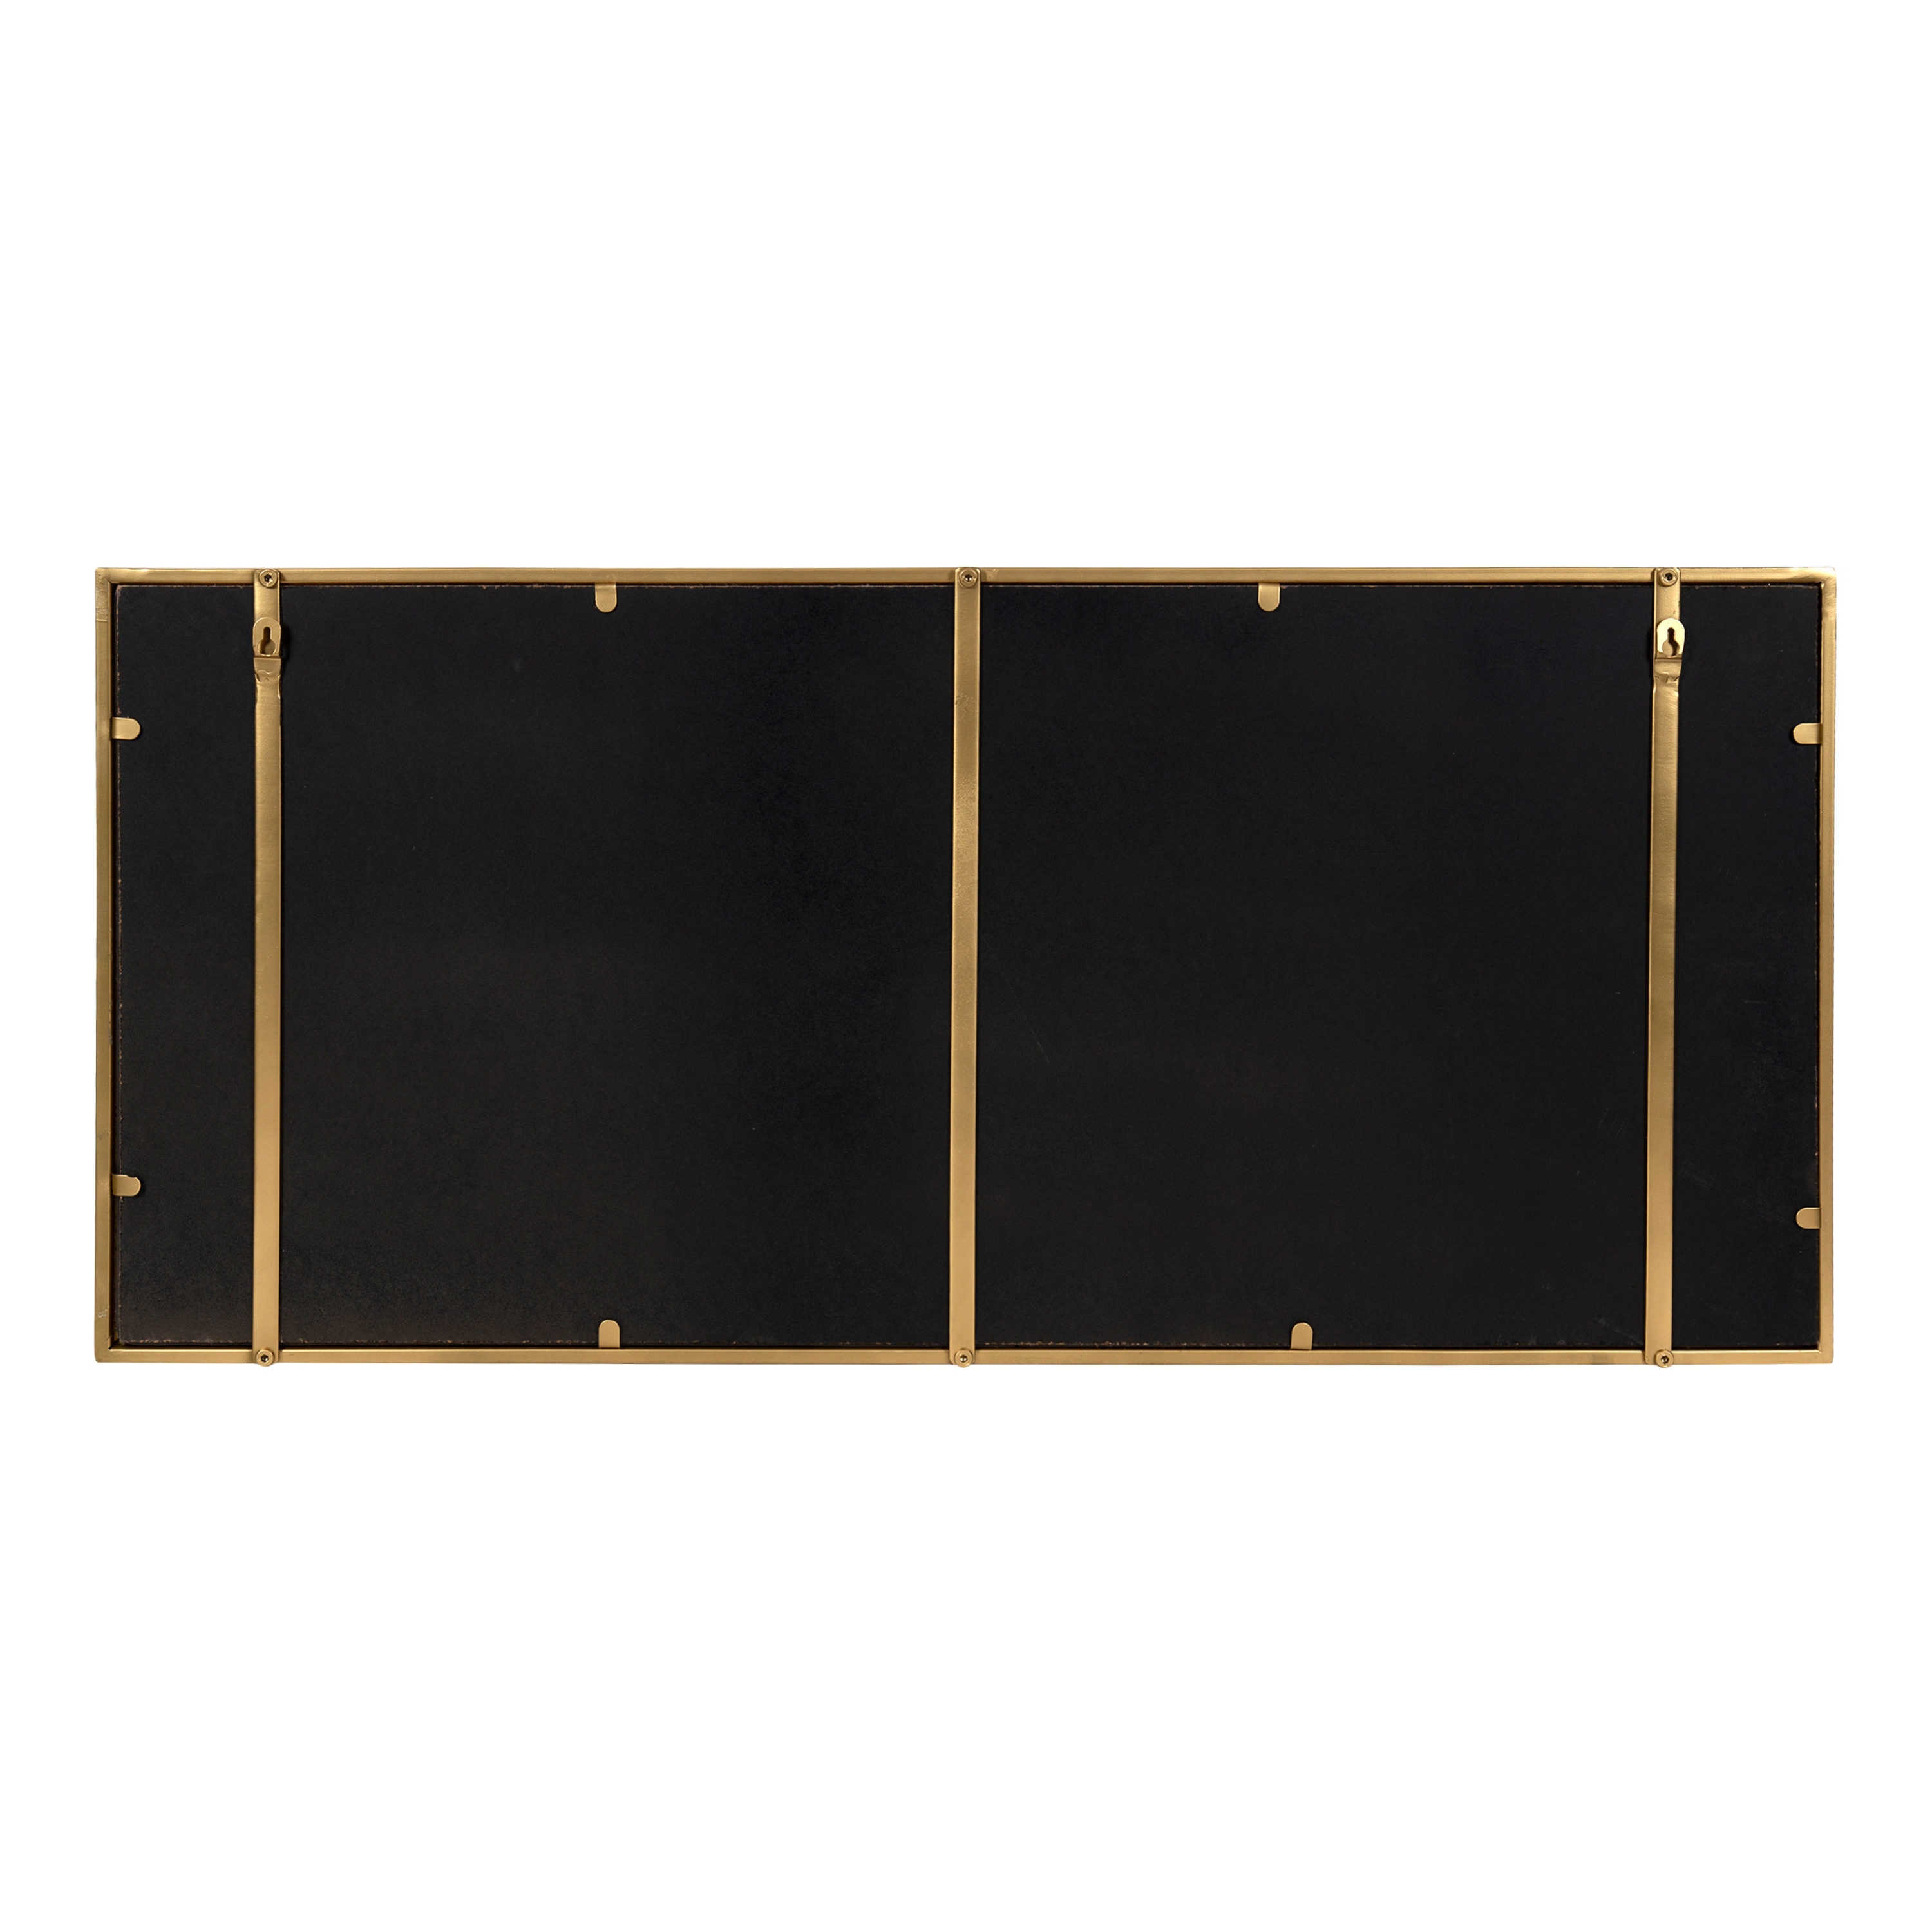 Kate and Laurel Jackson 40-in W x 18-in H Gold Framed Wall Mirror in ...